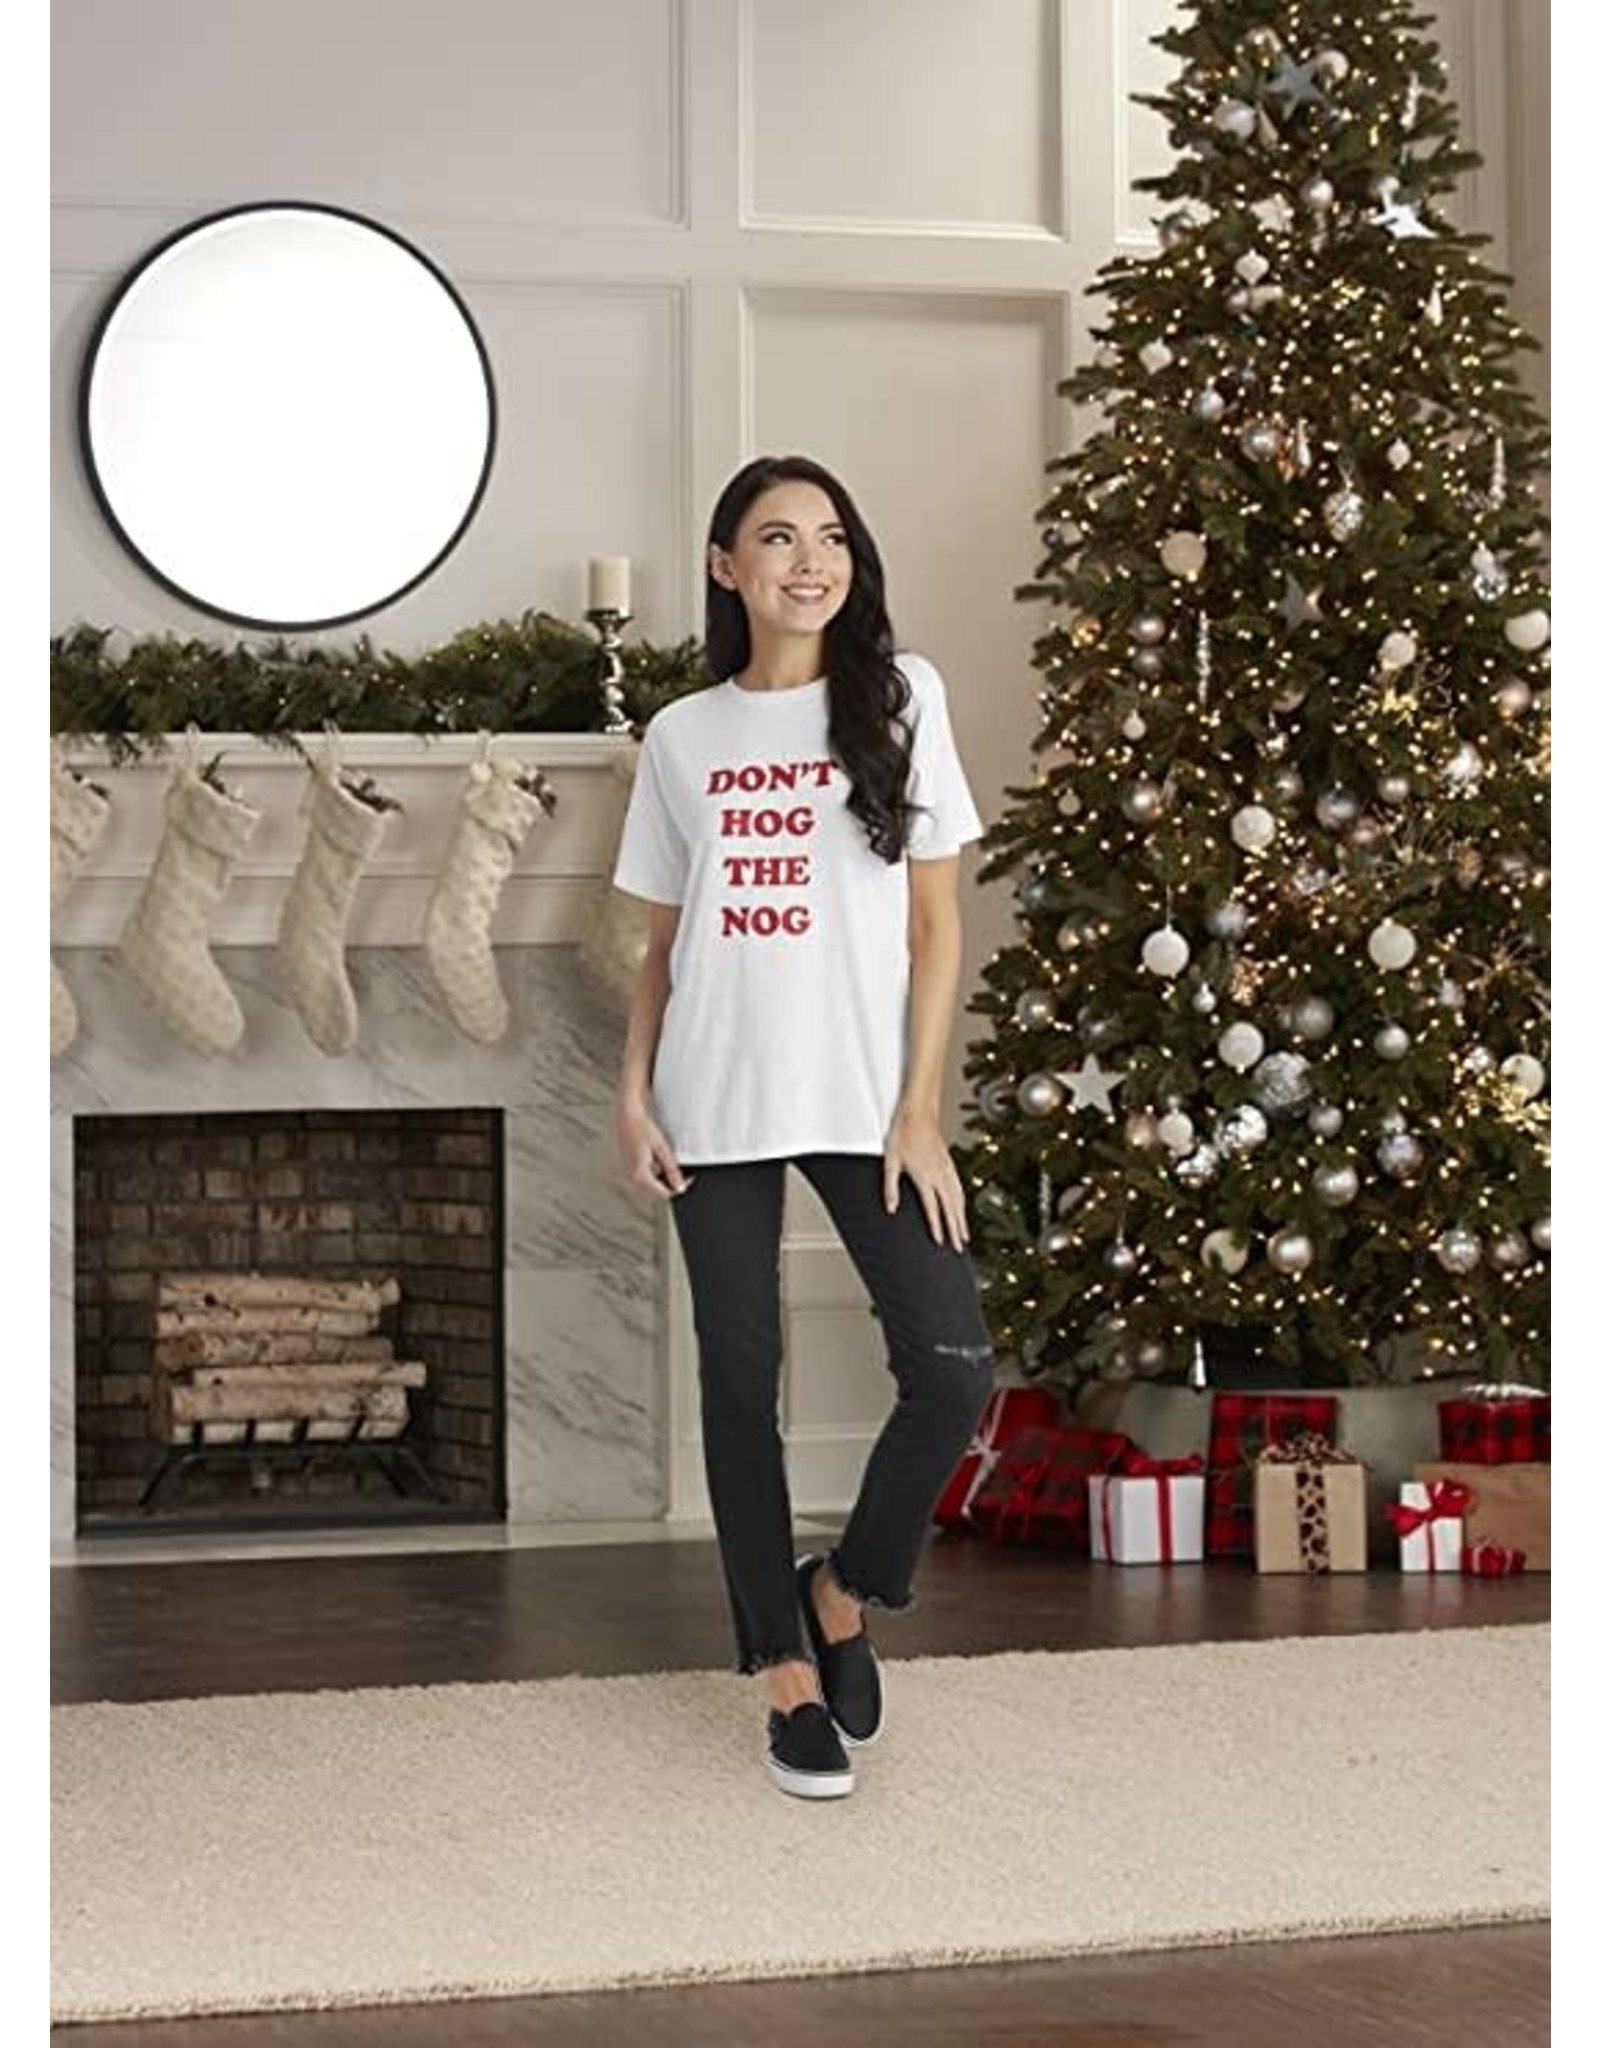 Mud Pie Holiday Graphic Tees Dont Hog The Nog T-Shirt S-M